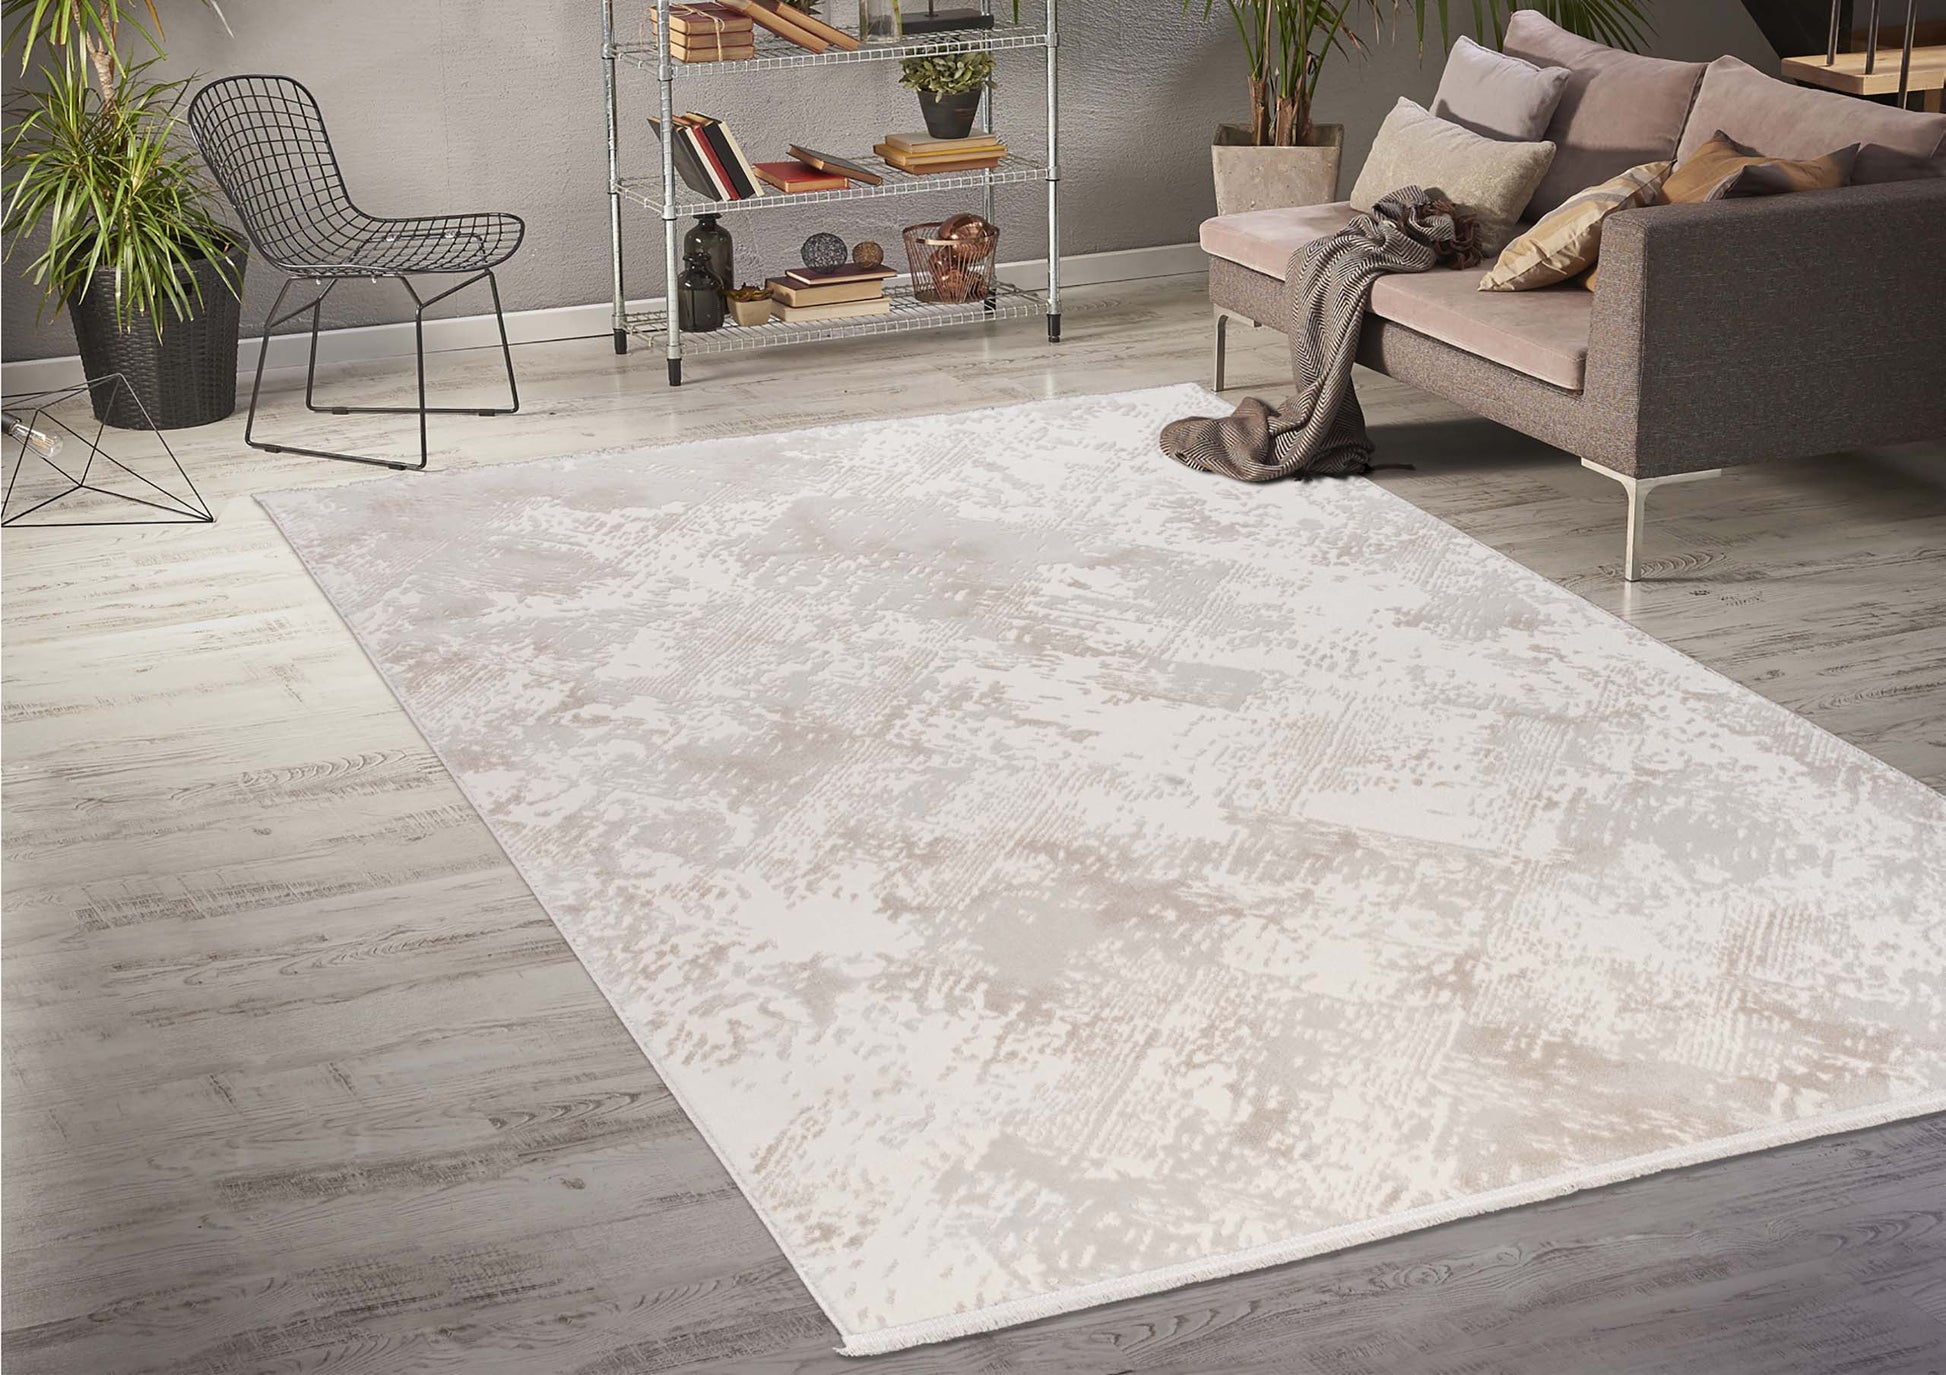 ladole rugs abstract pattern home decor indoor area rug premium carpet for living room bedroom dining room kitchen and office cream 2x5, 3x5 Runner Rug, Entry Way, Entrance, Balcony, Bedside, Home Office, Table Top